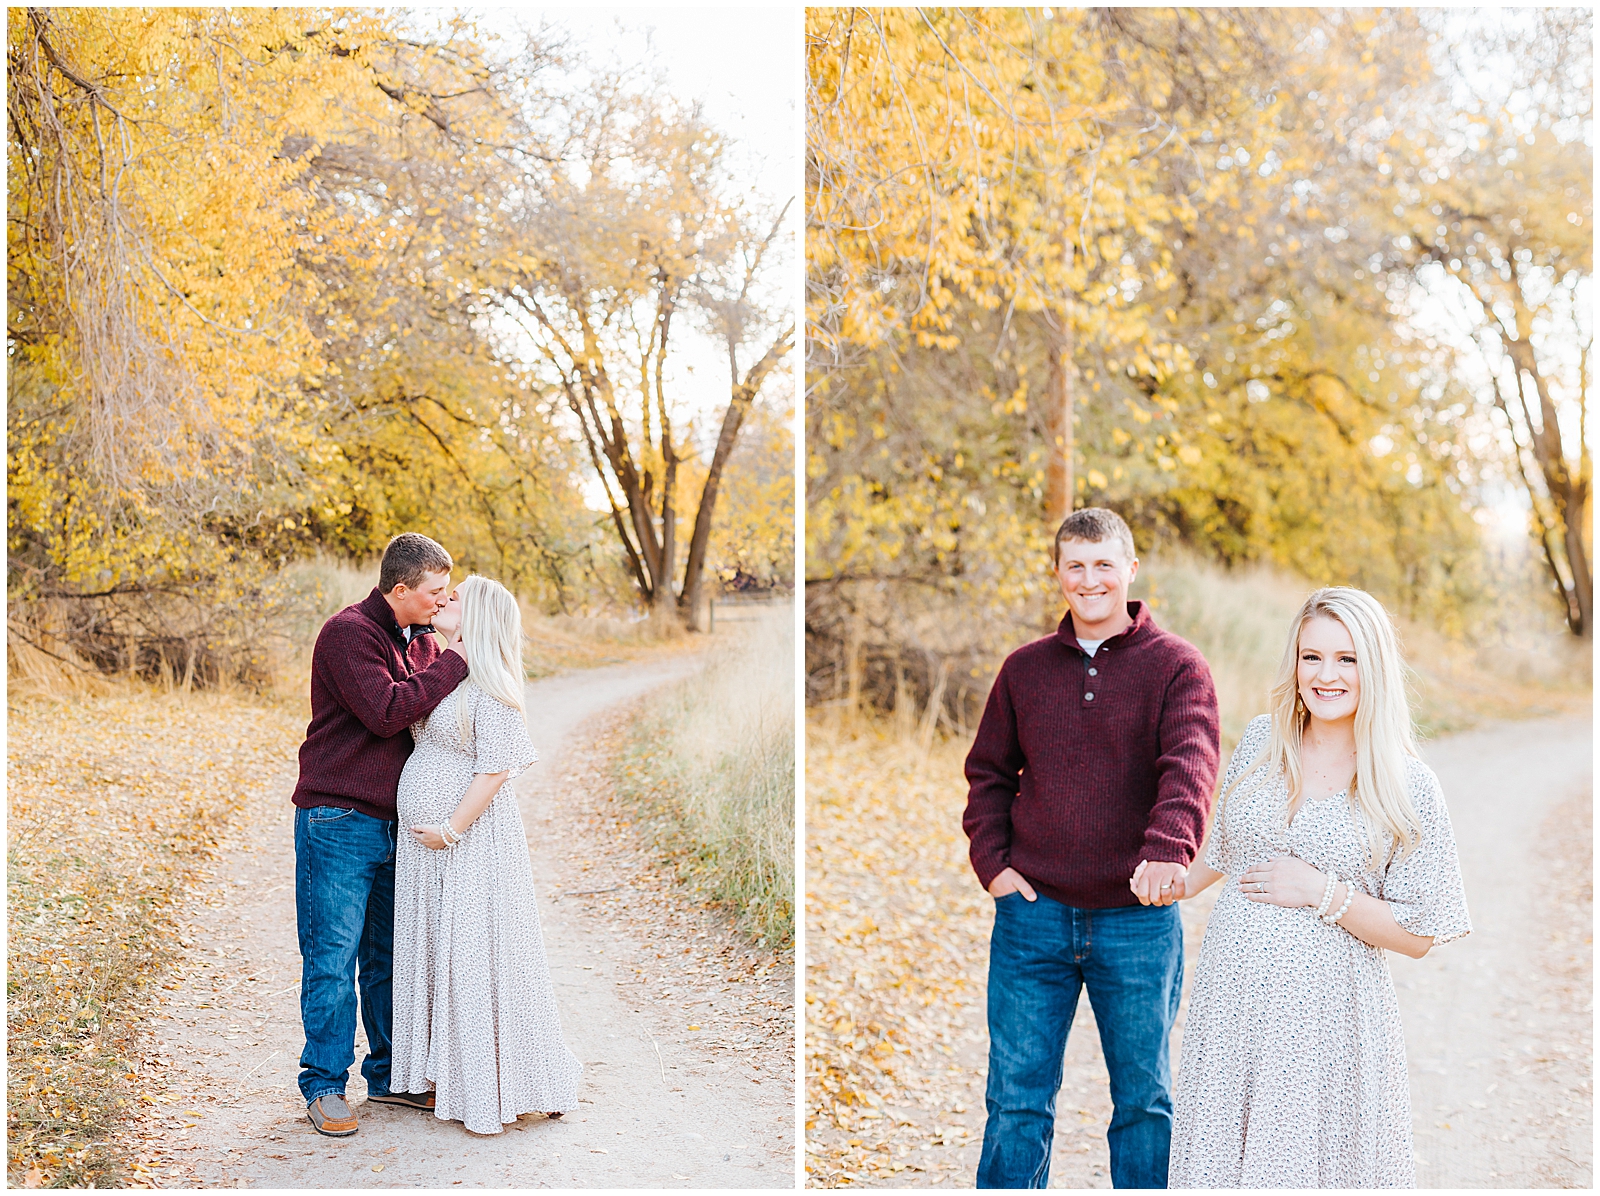 Boise Maternity Session in the Fall Foothills